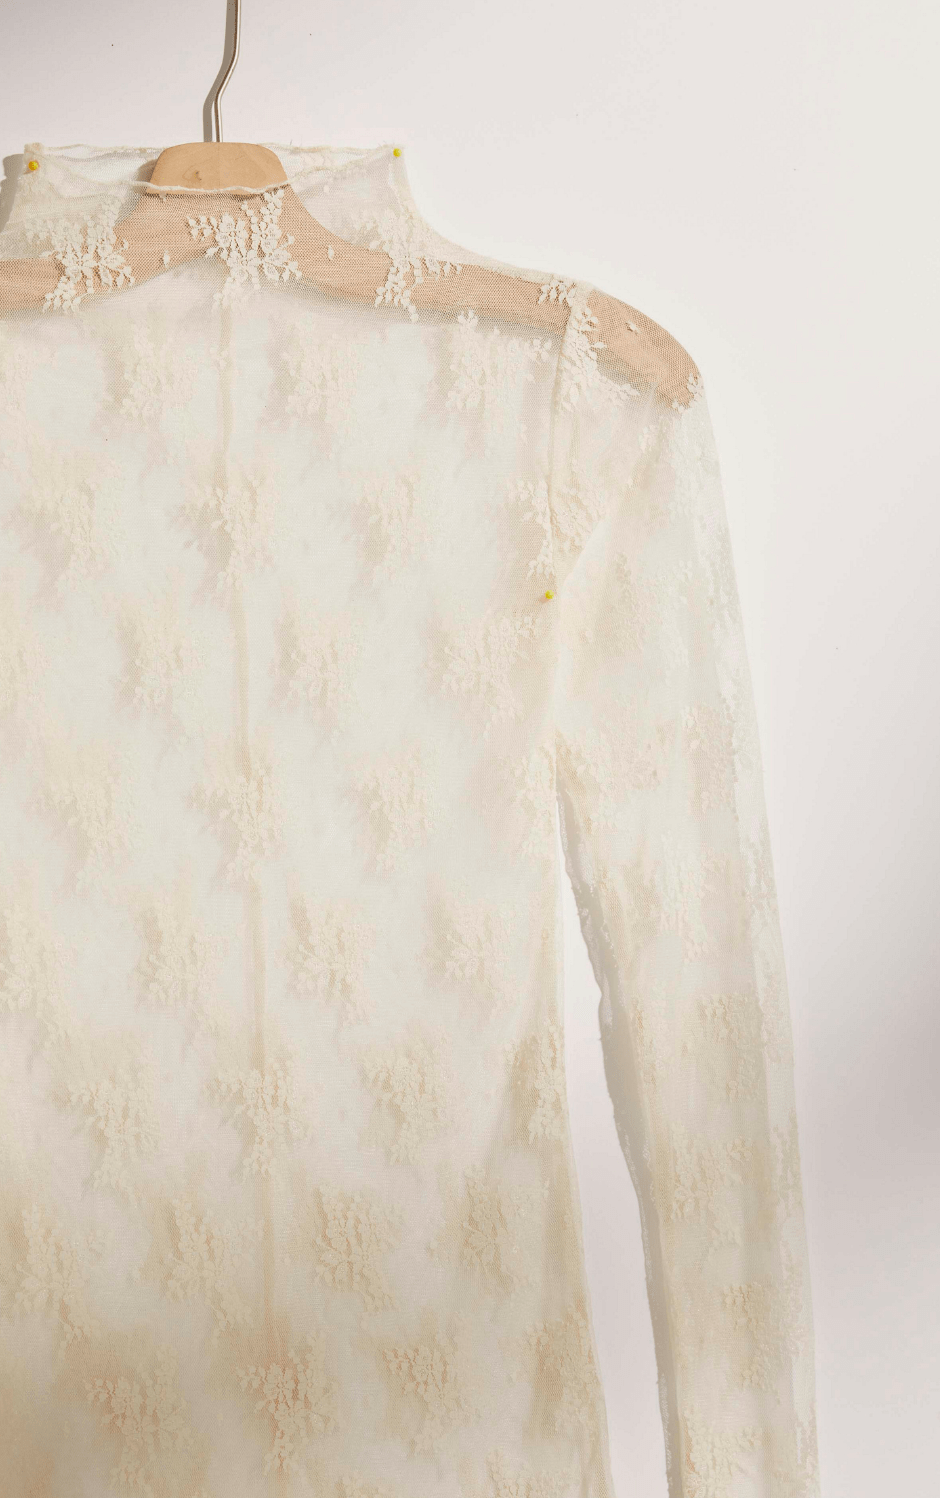 LADY LUX LAYERING TOP by Free People